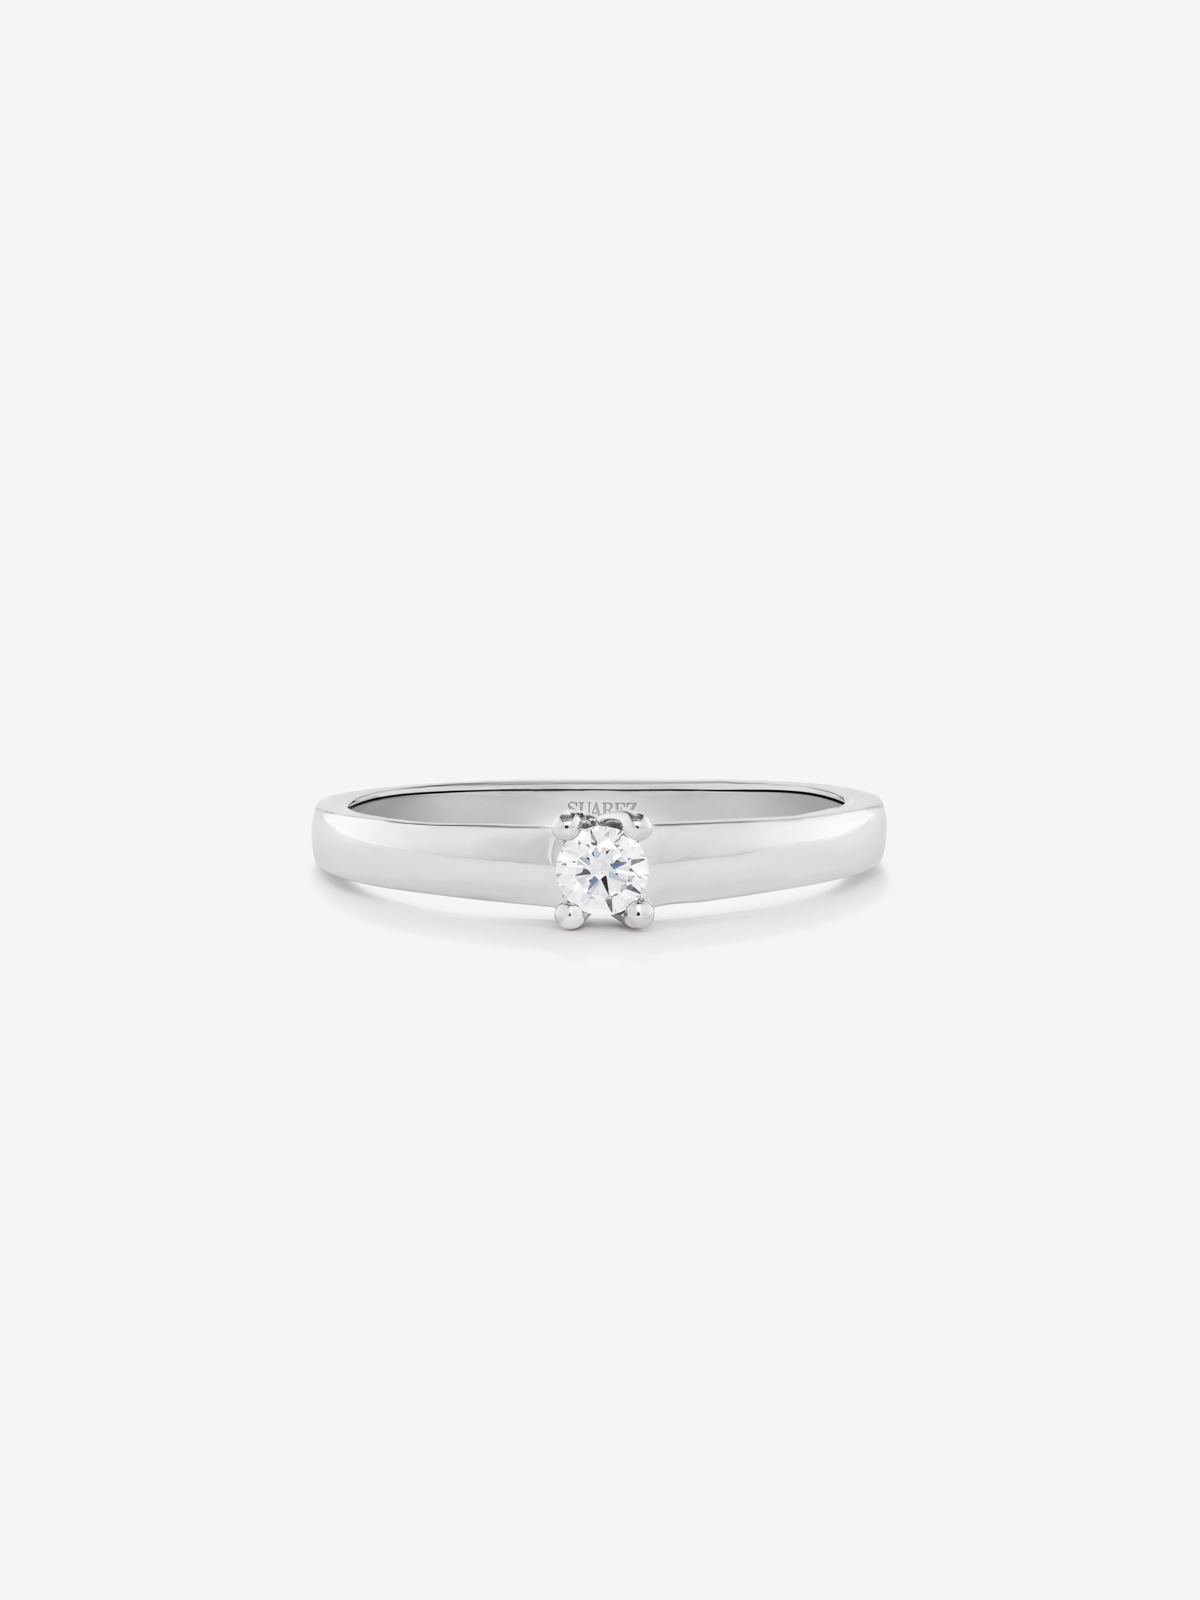 White gold engagement ring with diamond